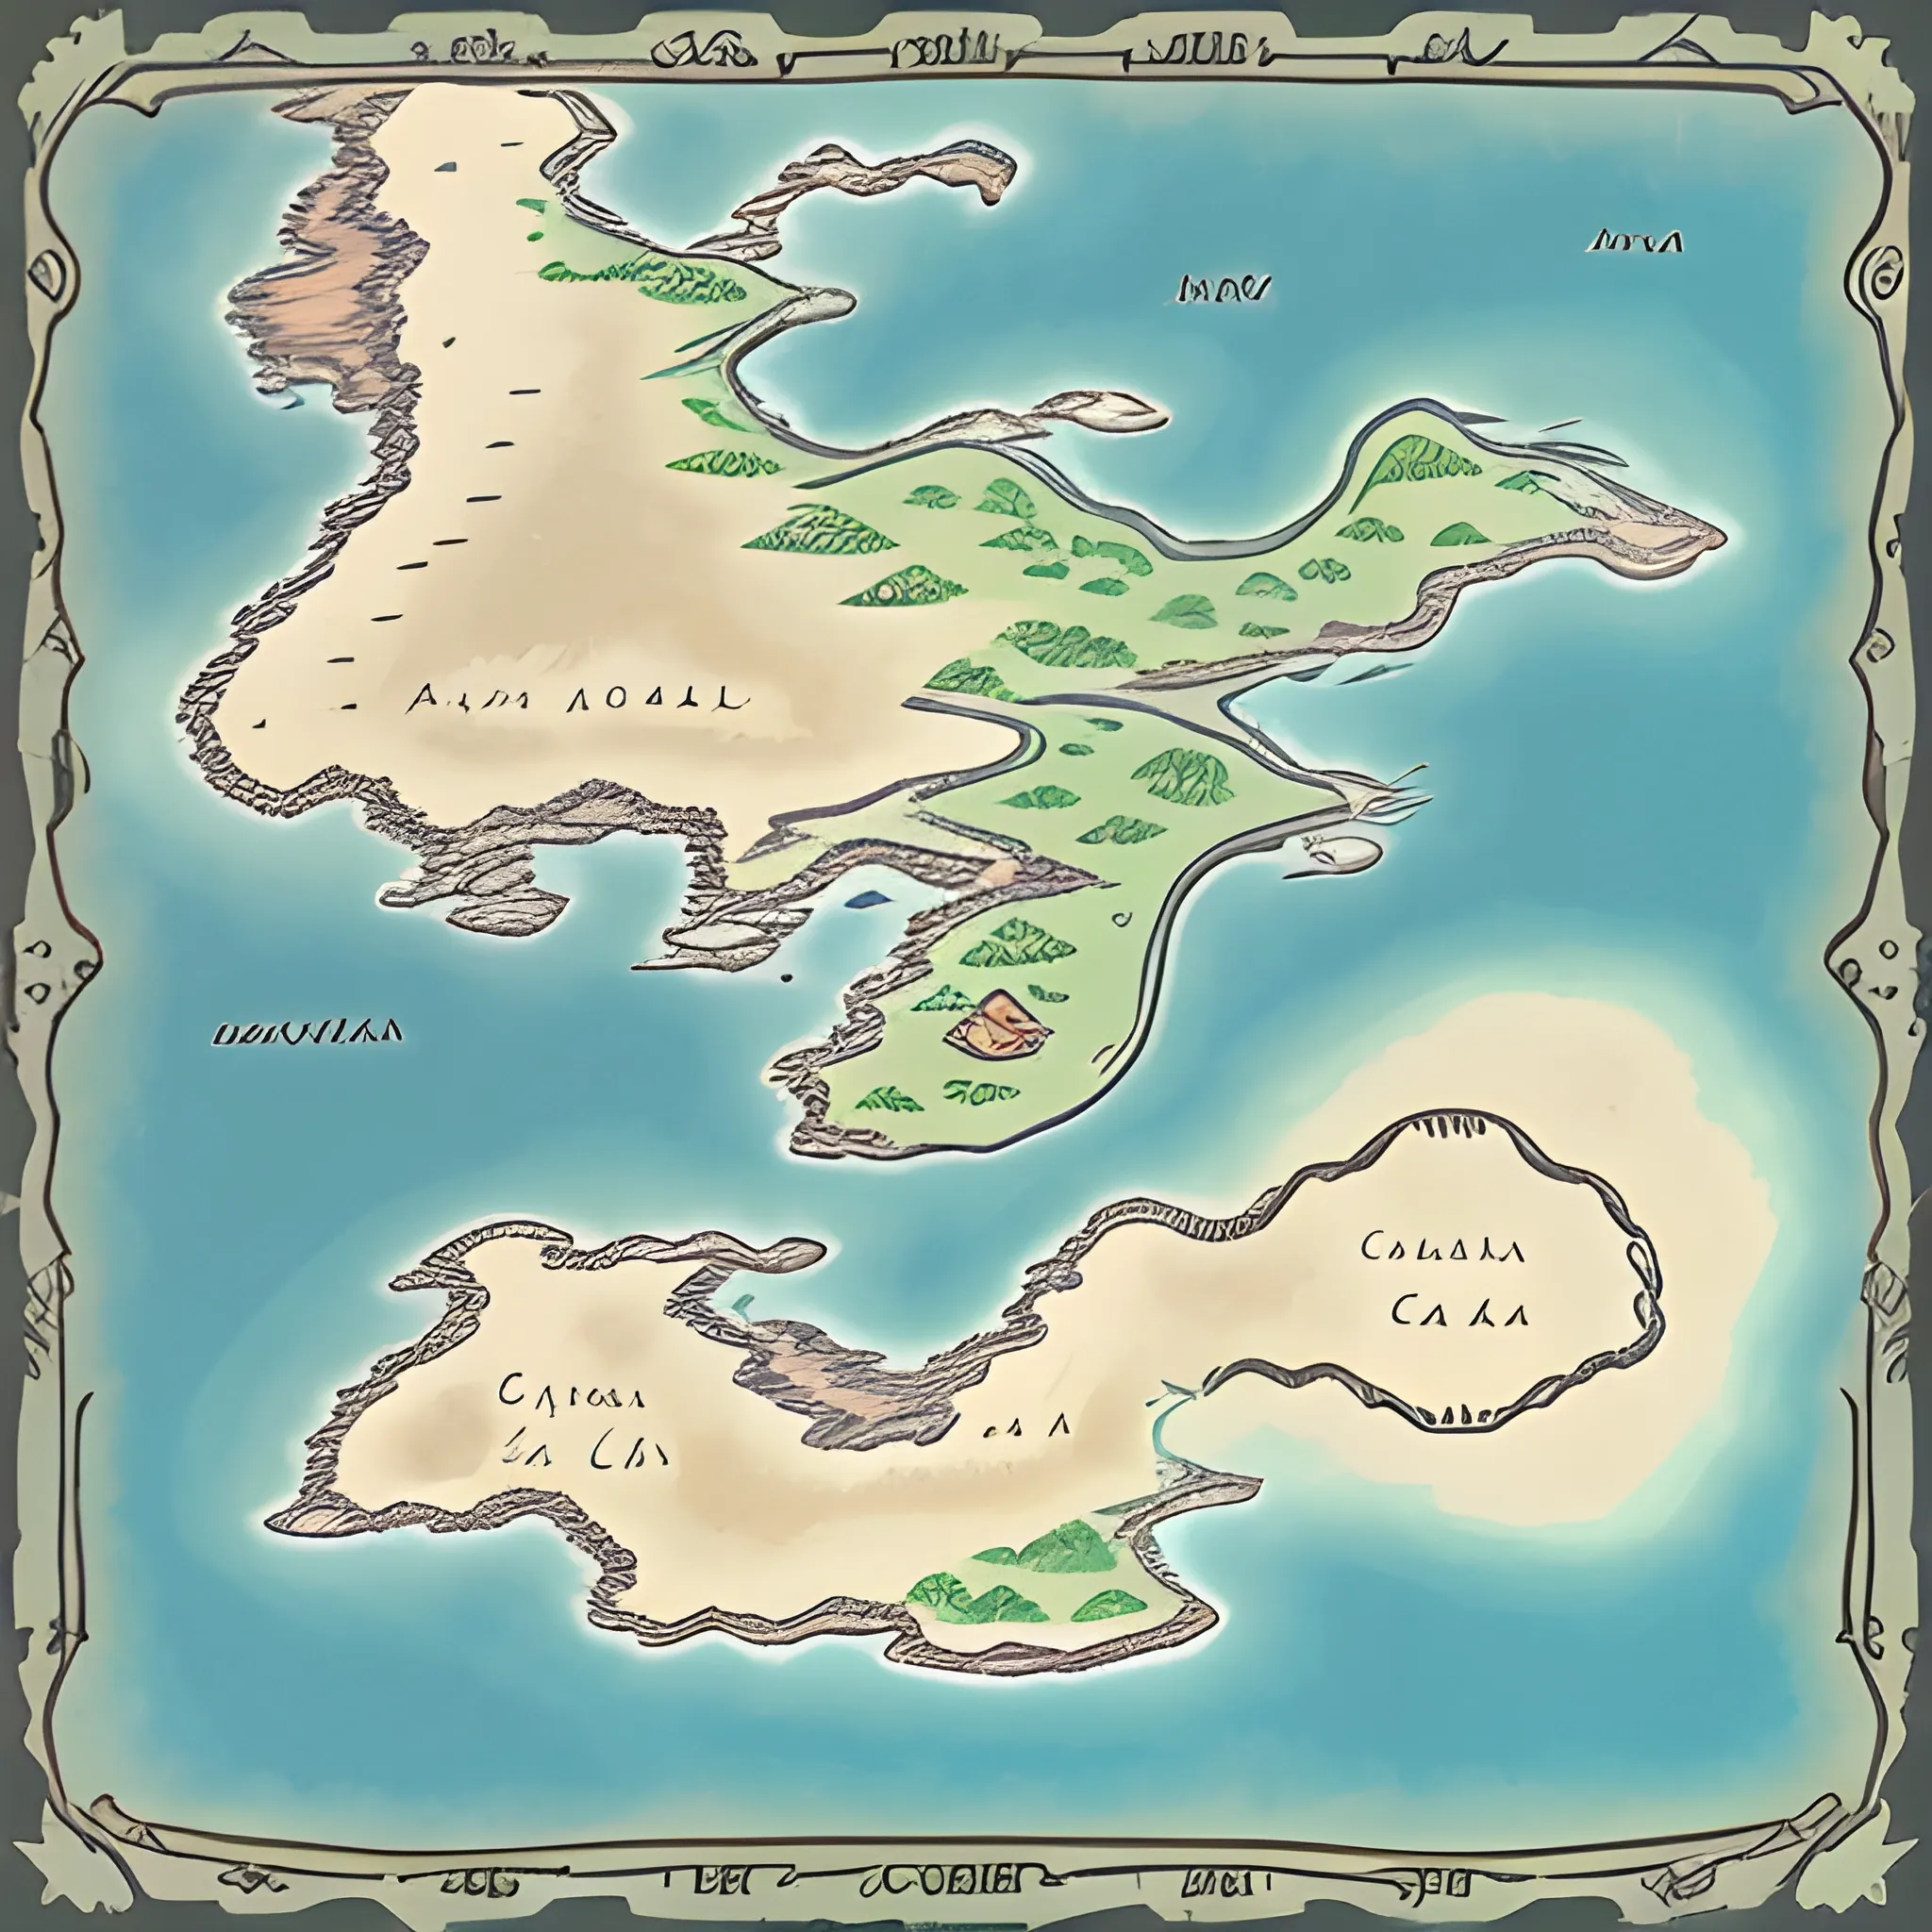 breath of the wild style map of a fantasy continent.